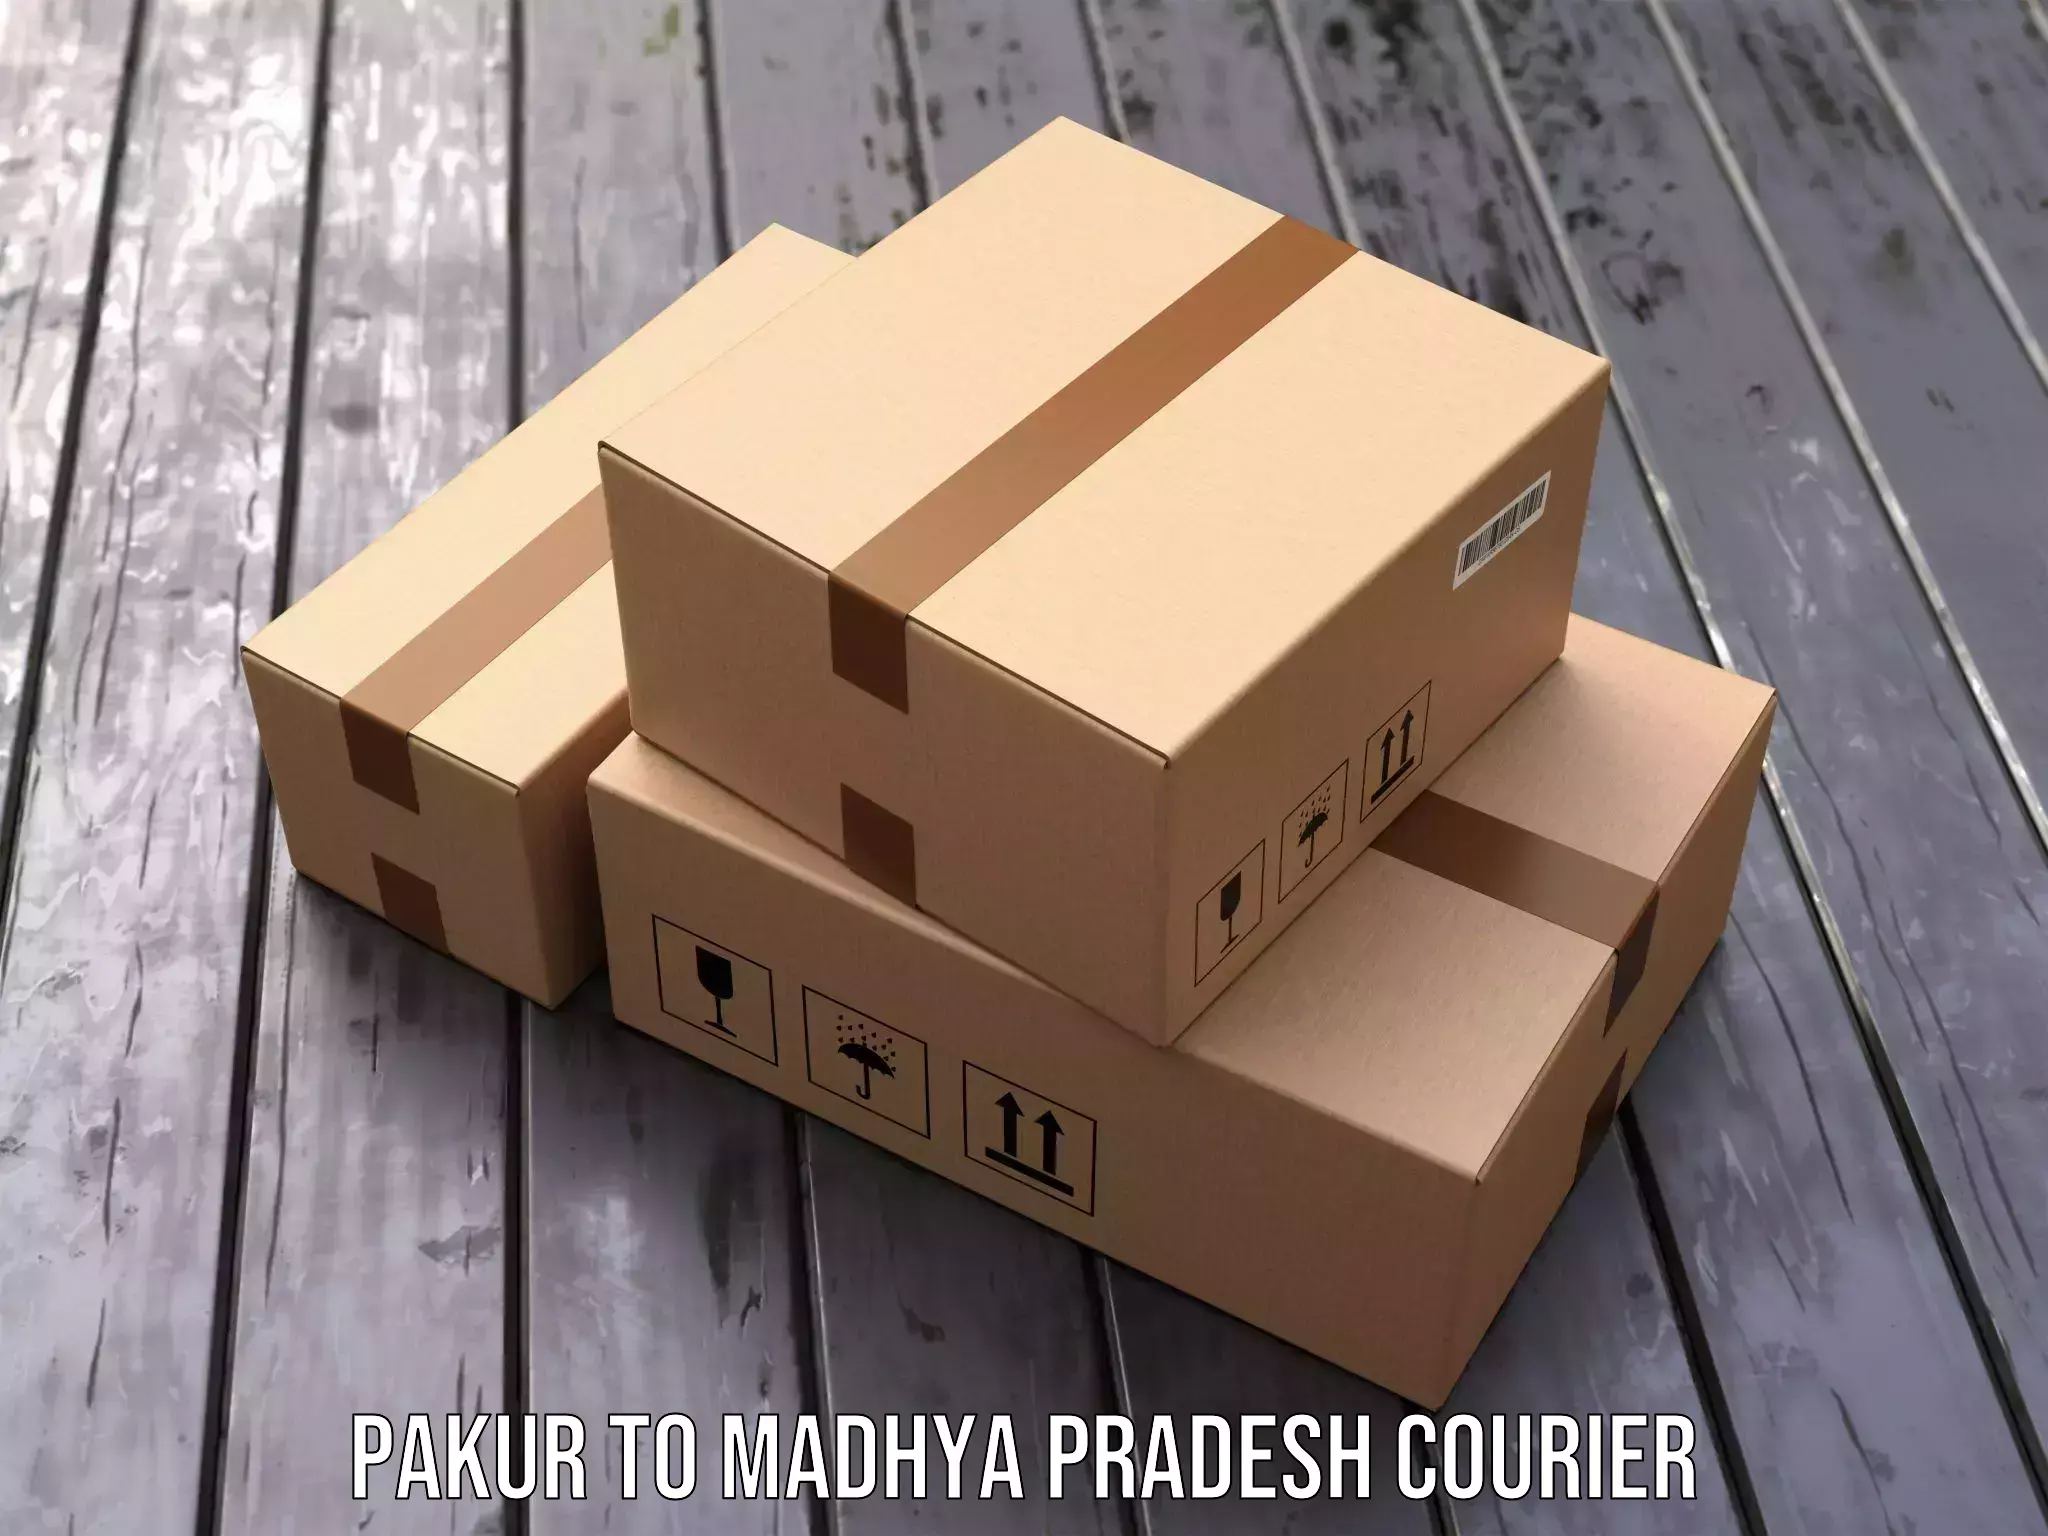 Package delivery network Pakur to Madhya Pradesh